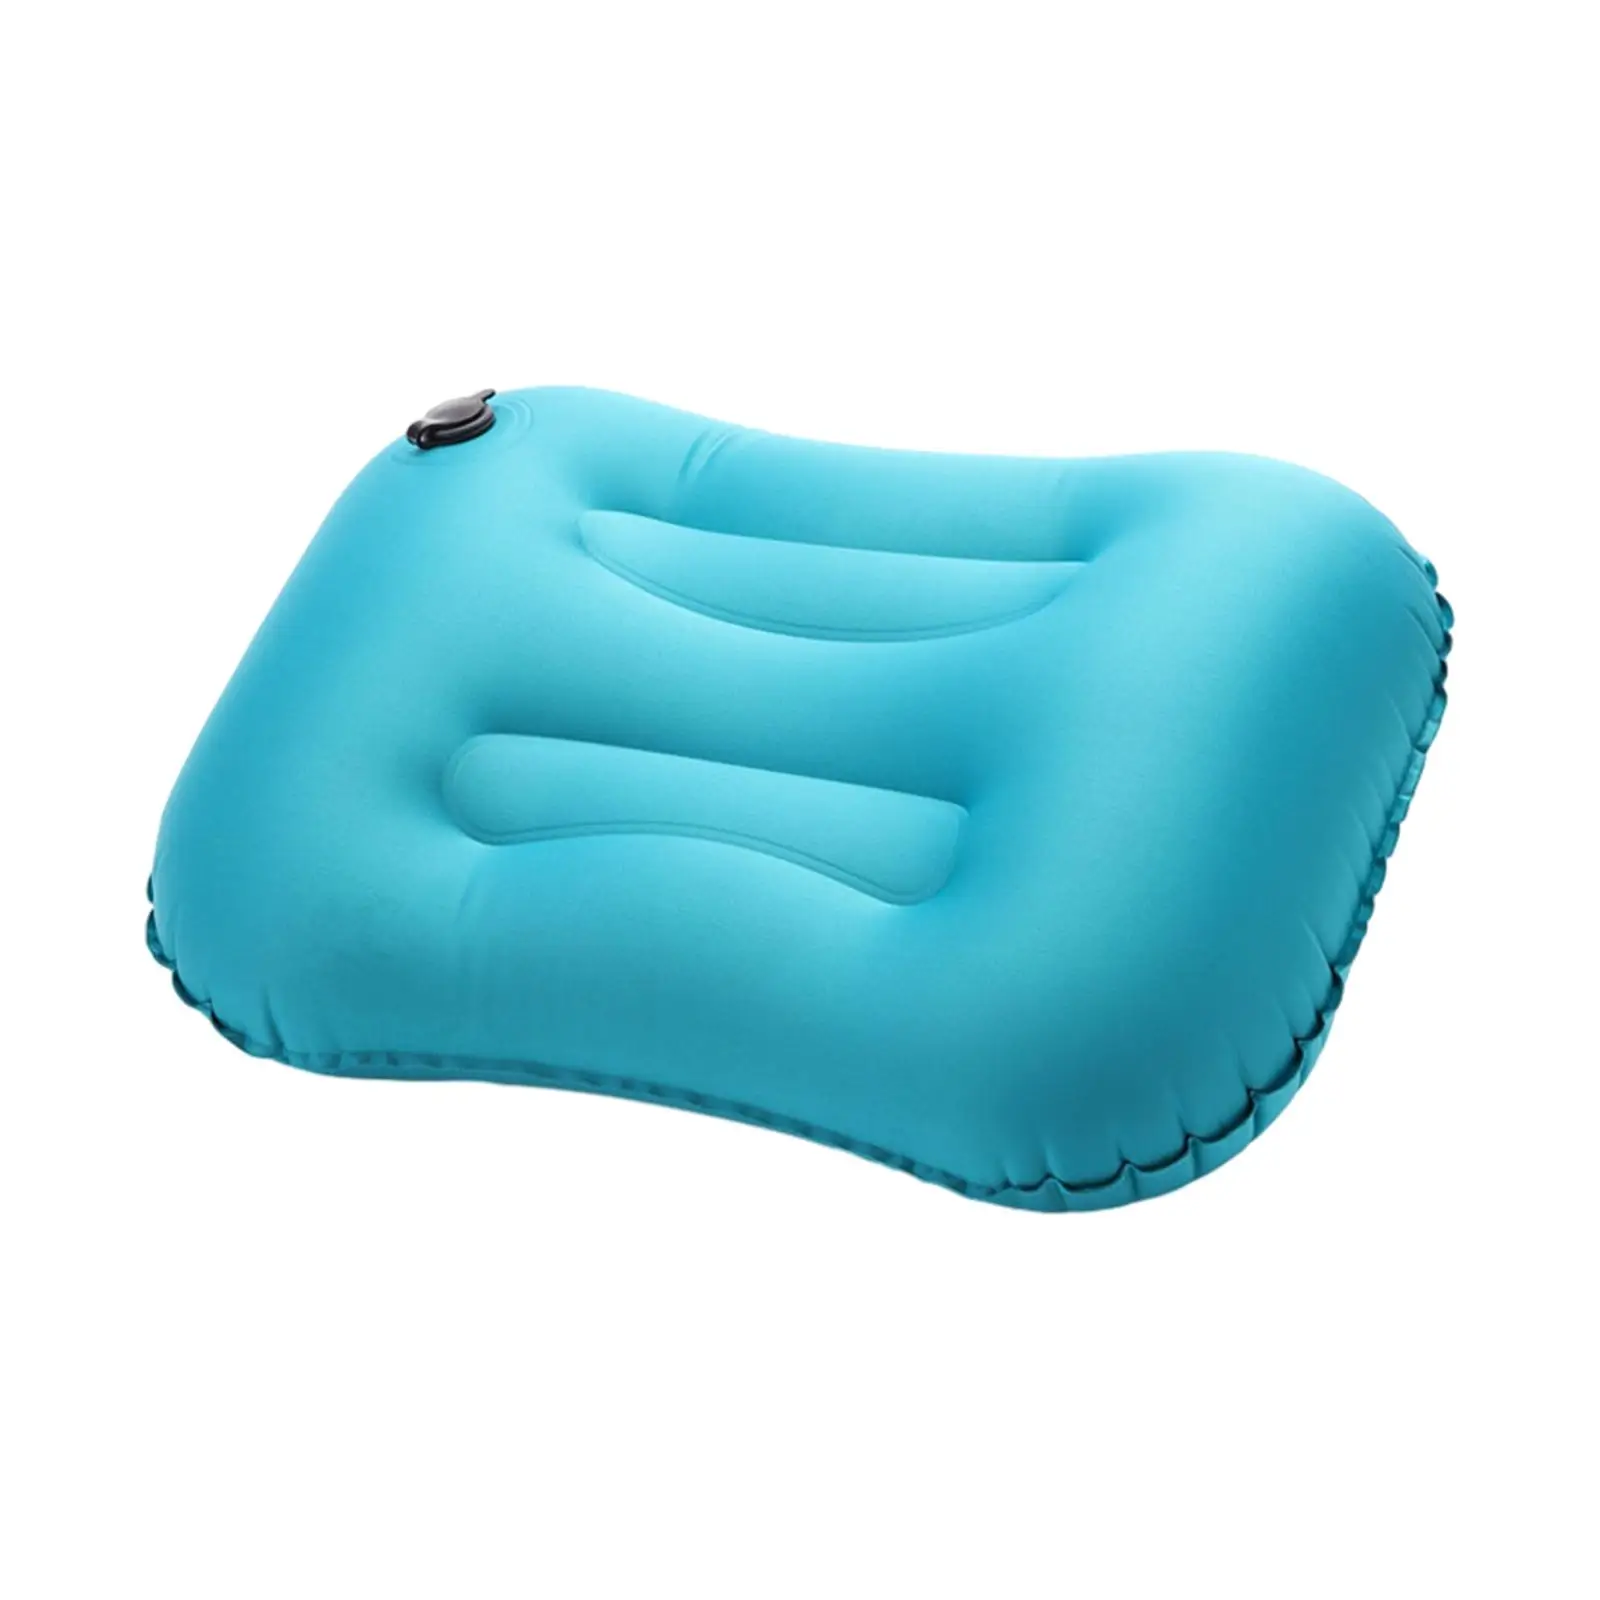 Camping Inflatable Pillow Blow up Air Pillow for Nap Rest Traveling Hiking